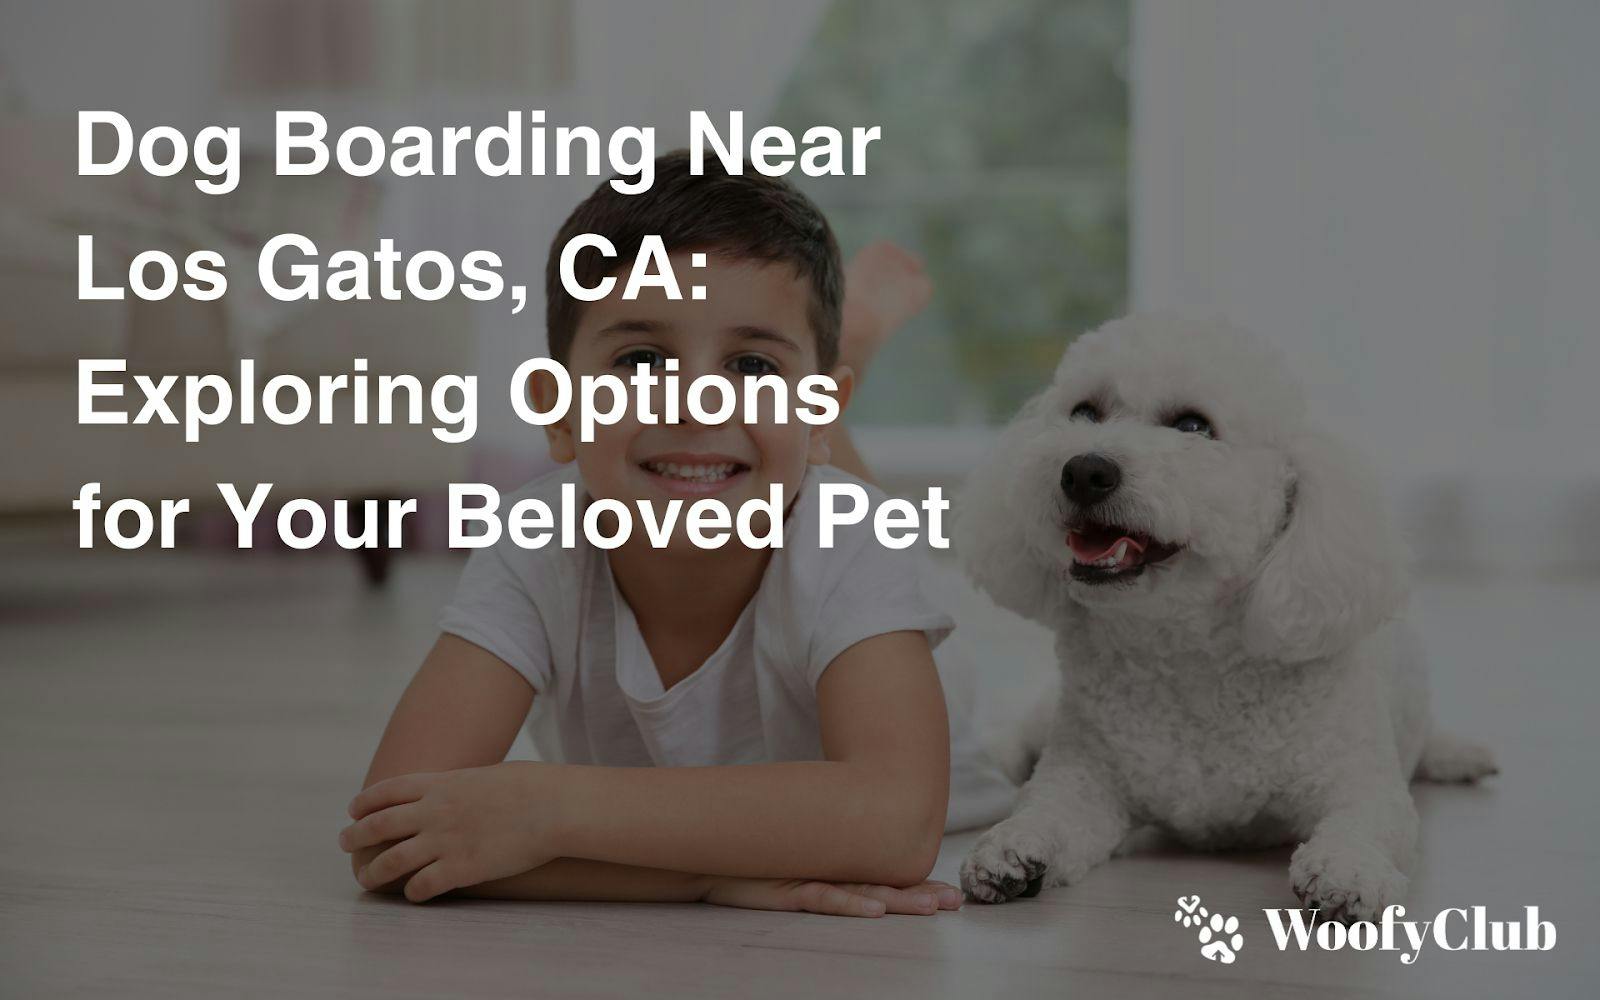 Dog Boarding Near Los Gatos, CA: Exploring Options For Your Beloved Pet